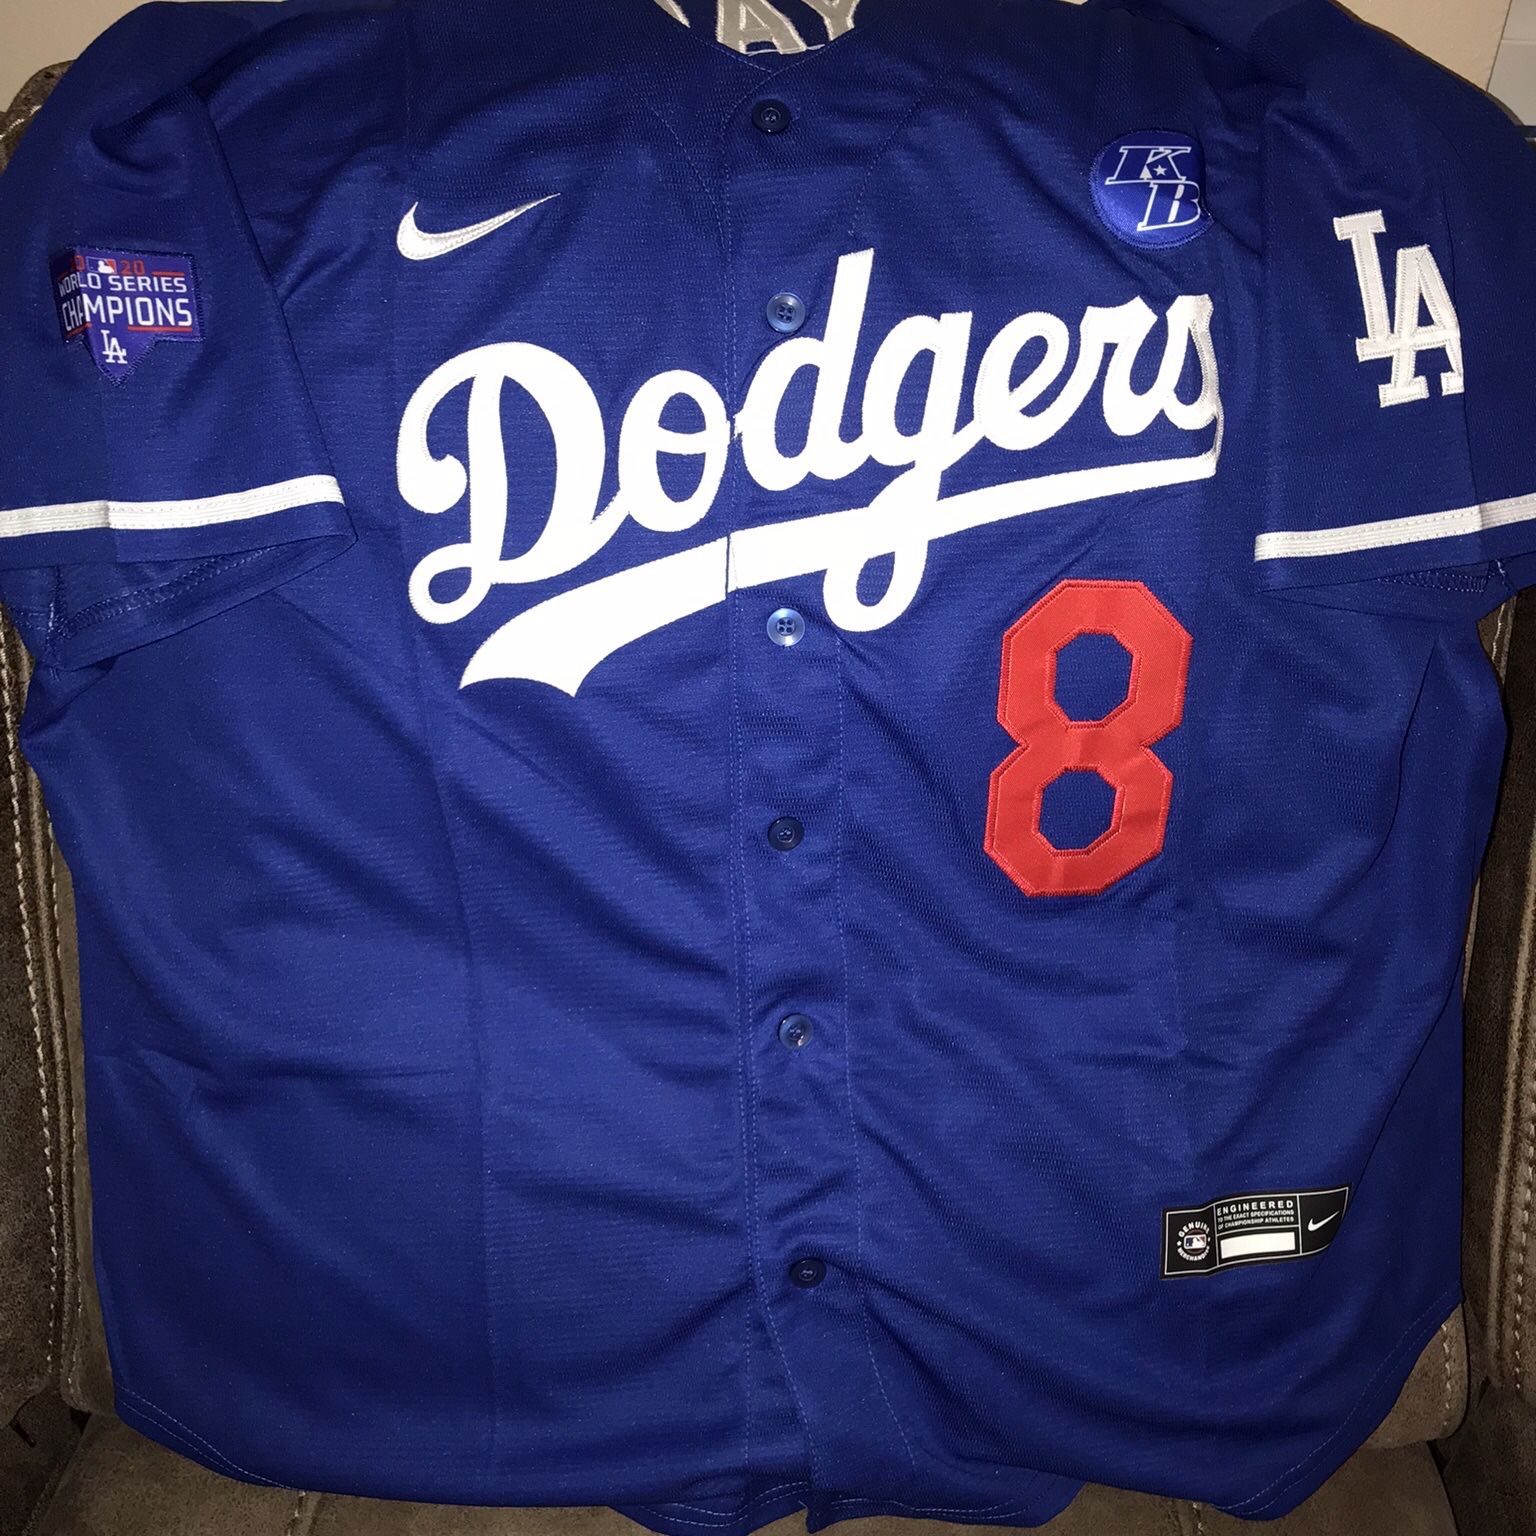 Kobe Bryant Dodgers Championship Jersey Size S for Sale in